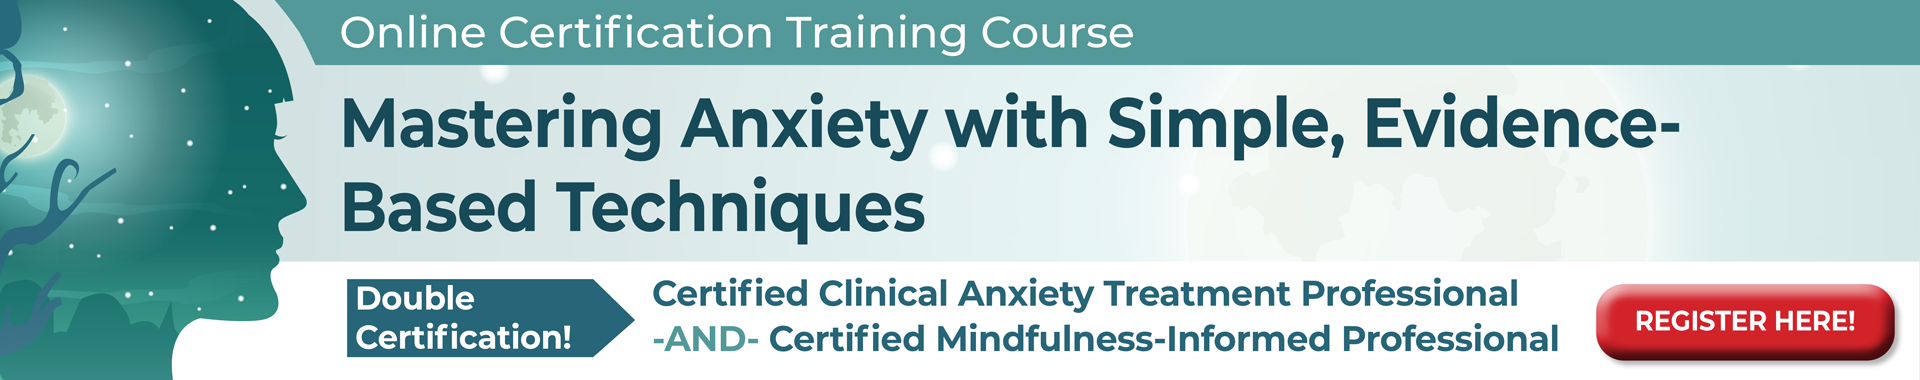 Mastering Anxiety with Simple, Evidence-Based Techniques